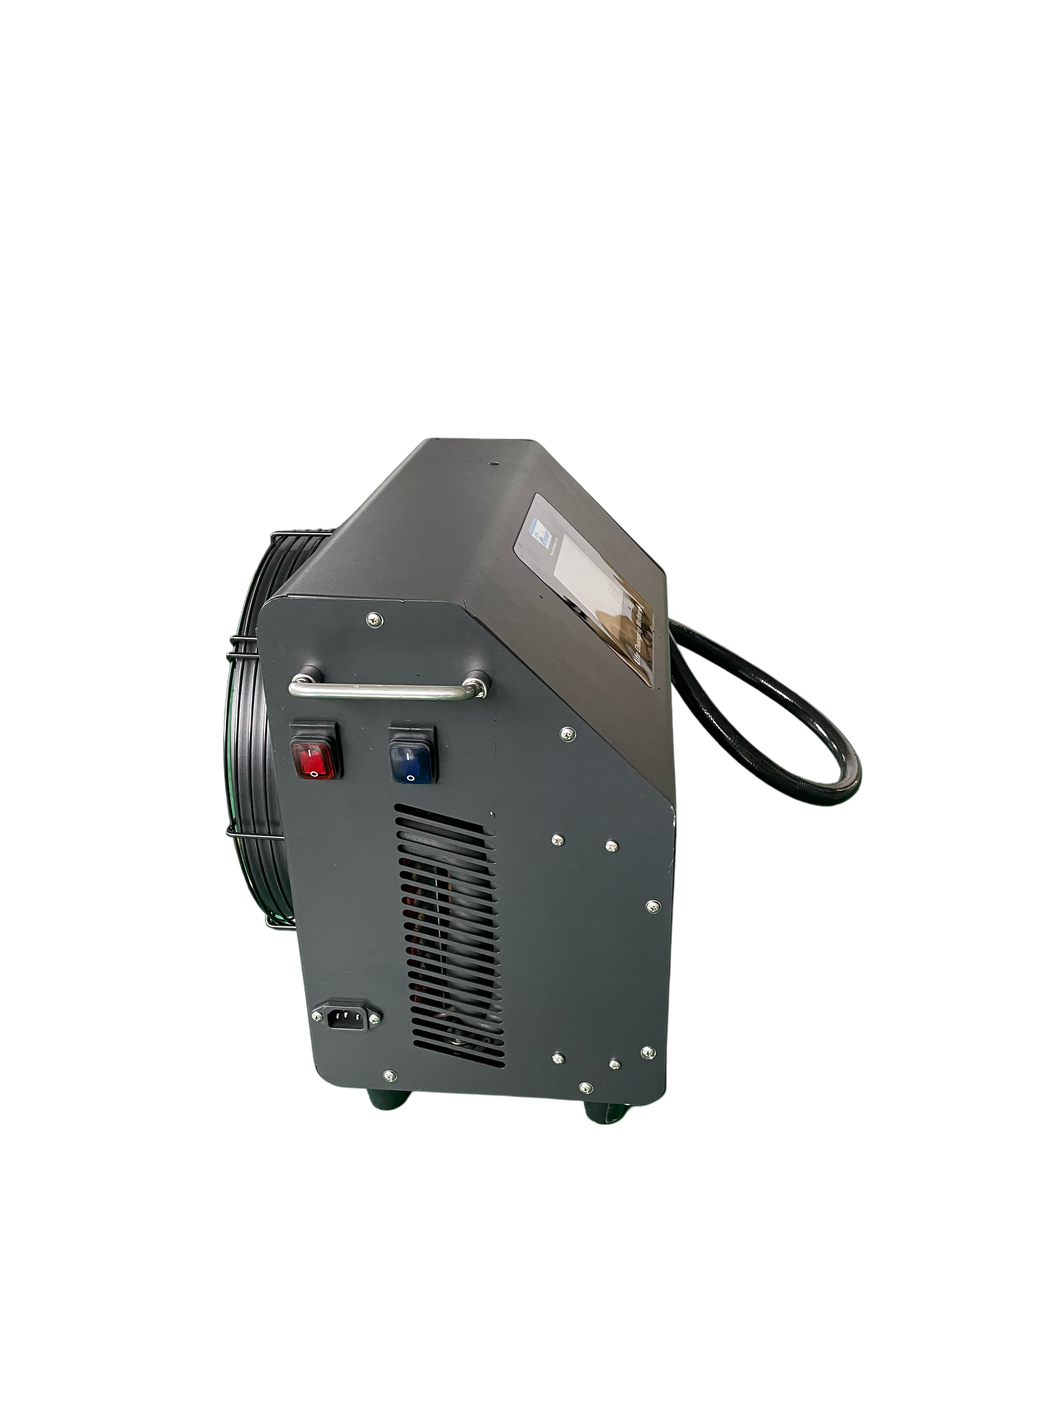 Premier Commercial Grade 1HP chiller and heater for cold plunge. Comes with filter, UV and ozone system.